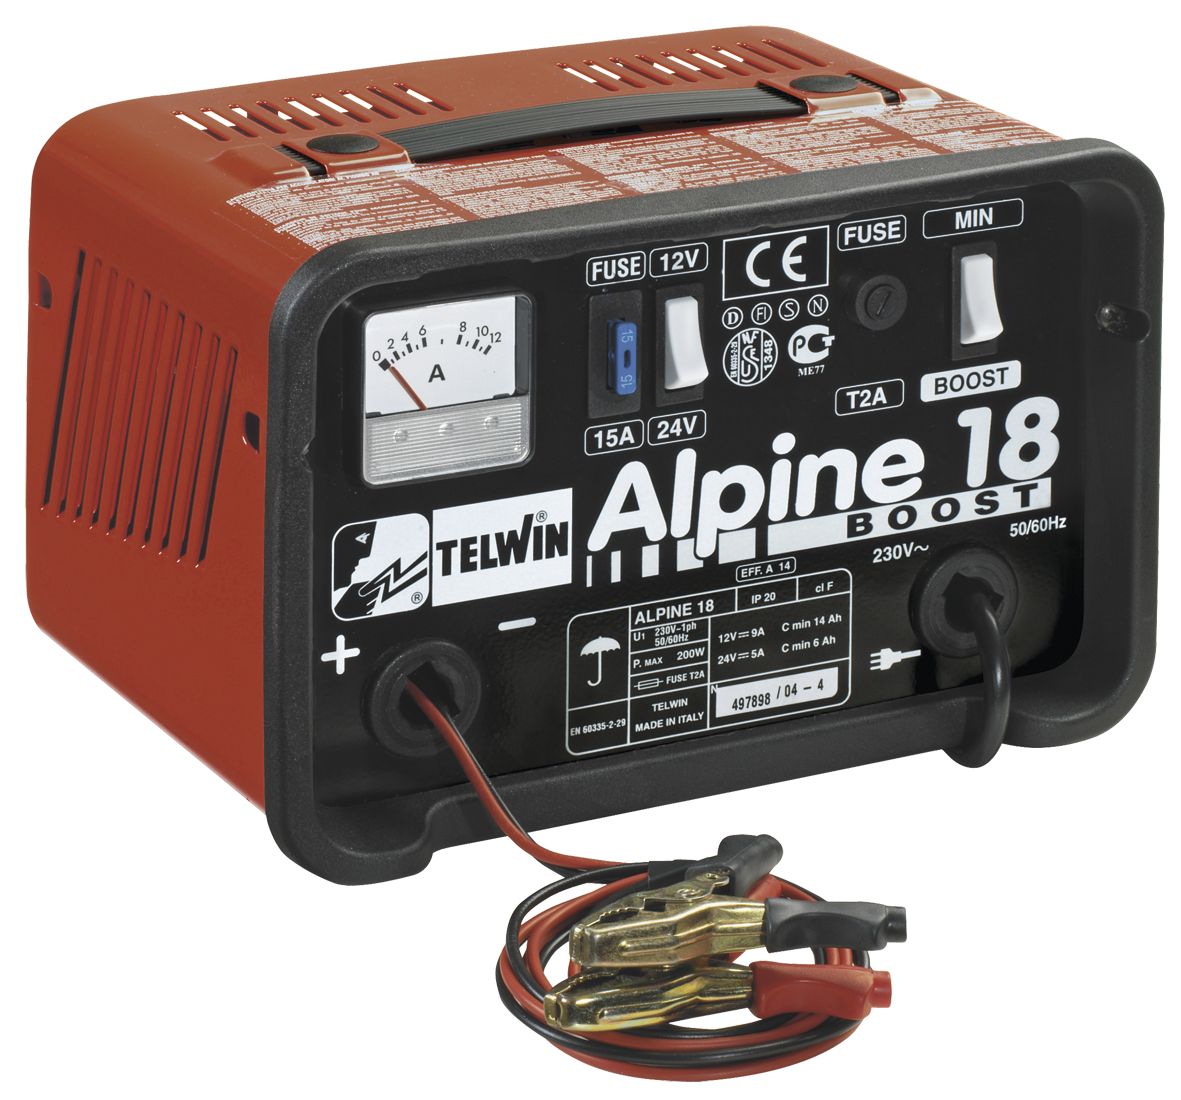 ALPINE 18 | Battery chargers and starters with transformer | Battery  chargers | Vynckier tools